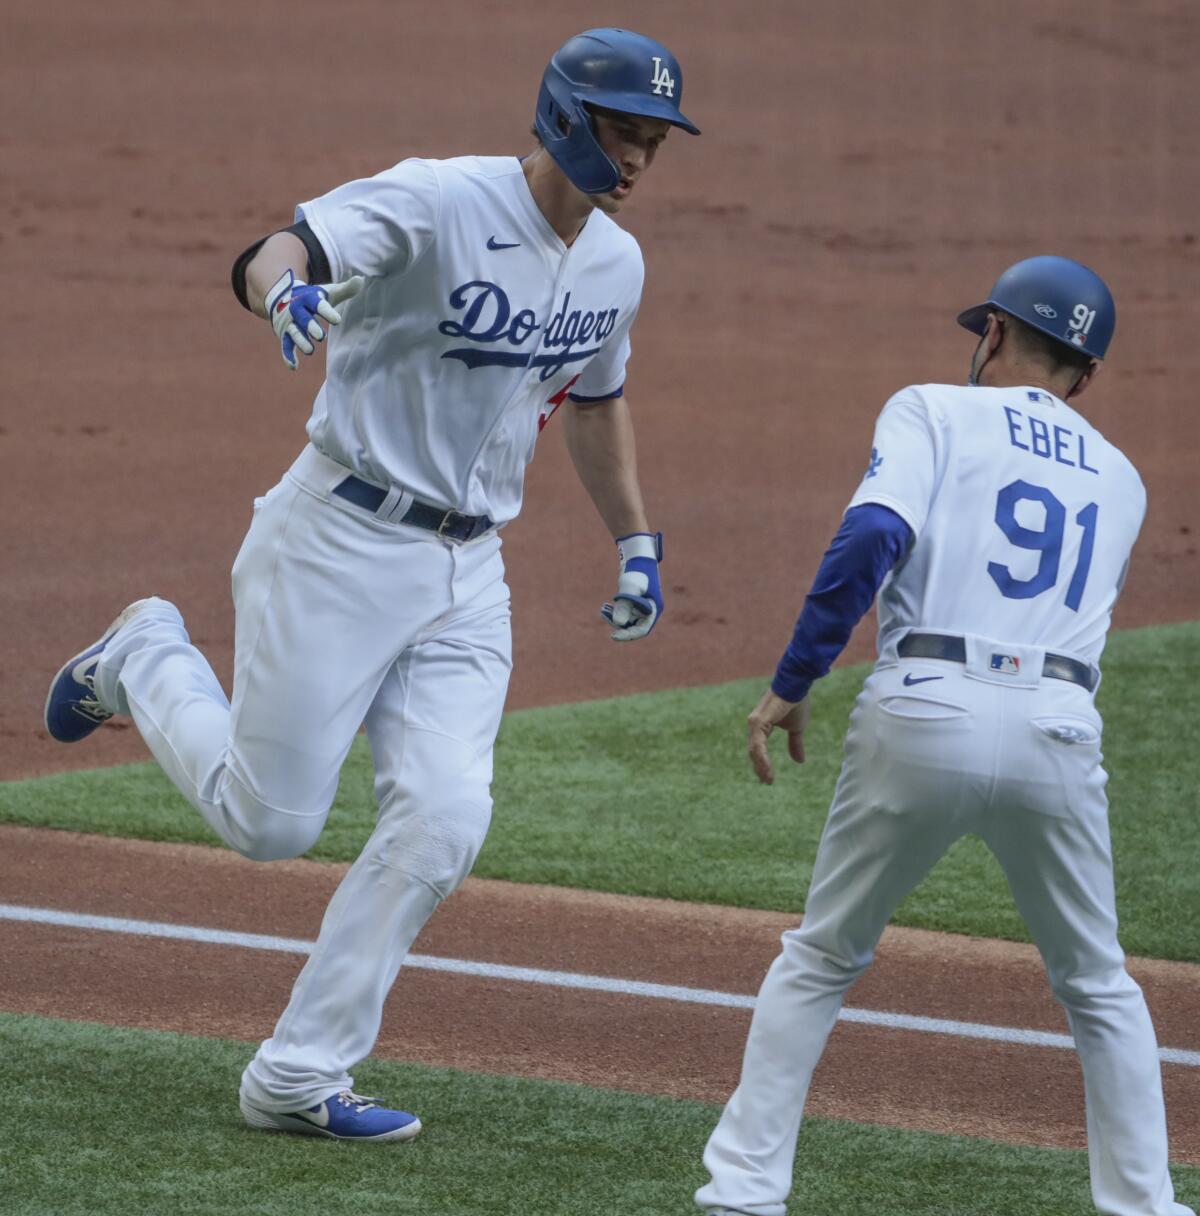 Corey Seager is a 2020 postseason star